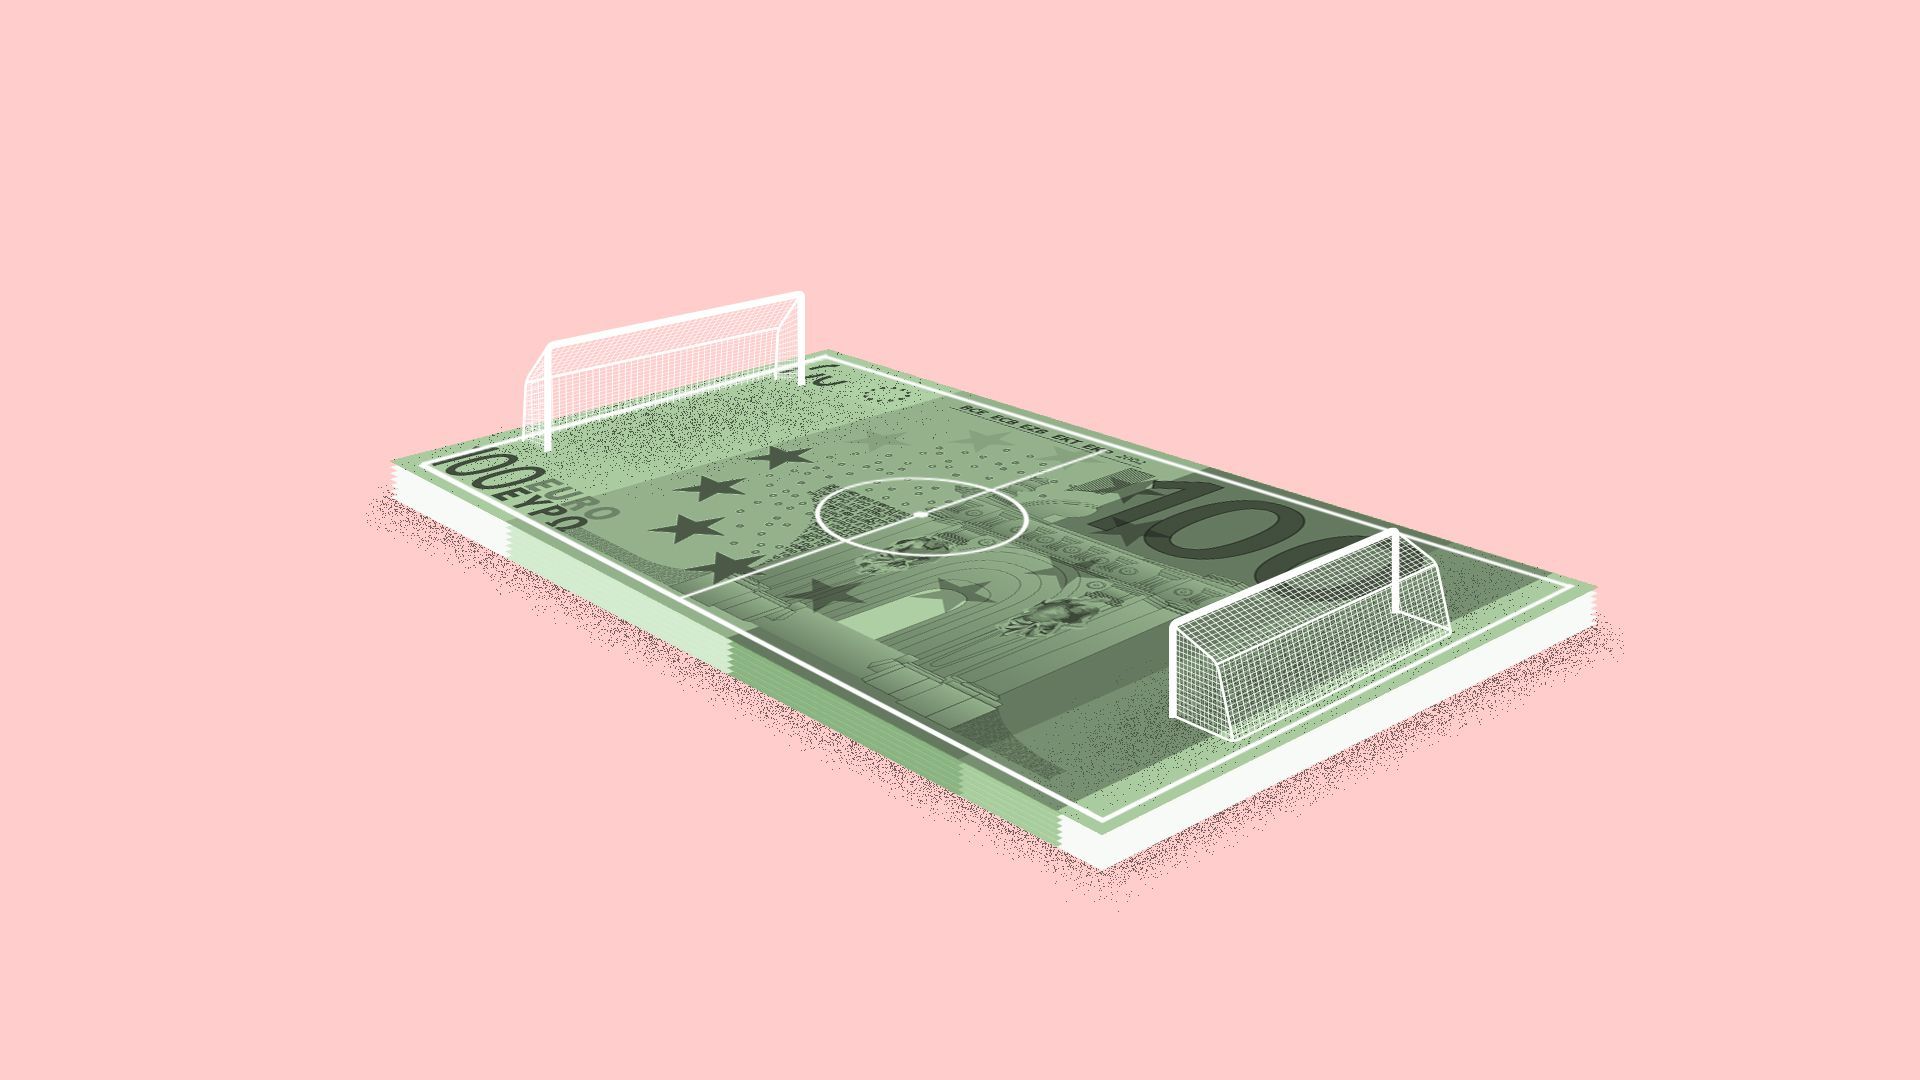 Illustration of a soccer pitch on top of a 100 Euro note